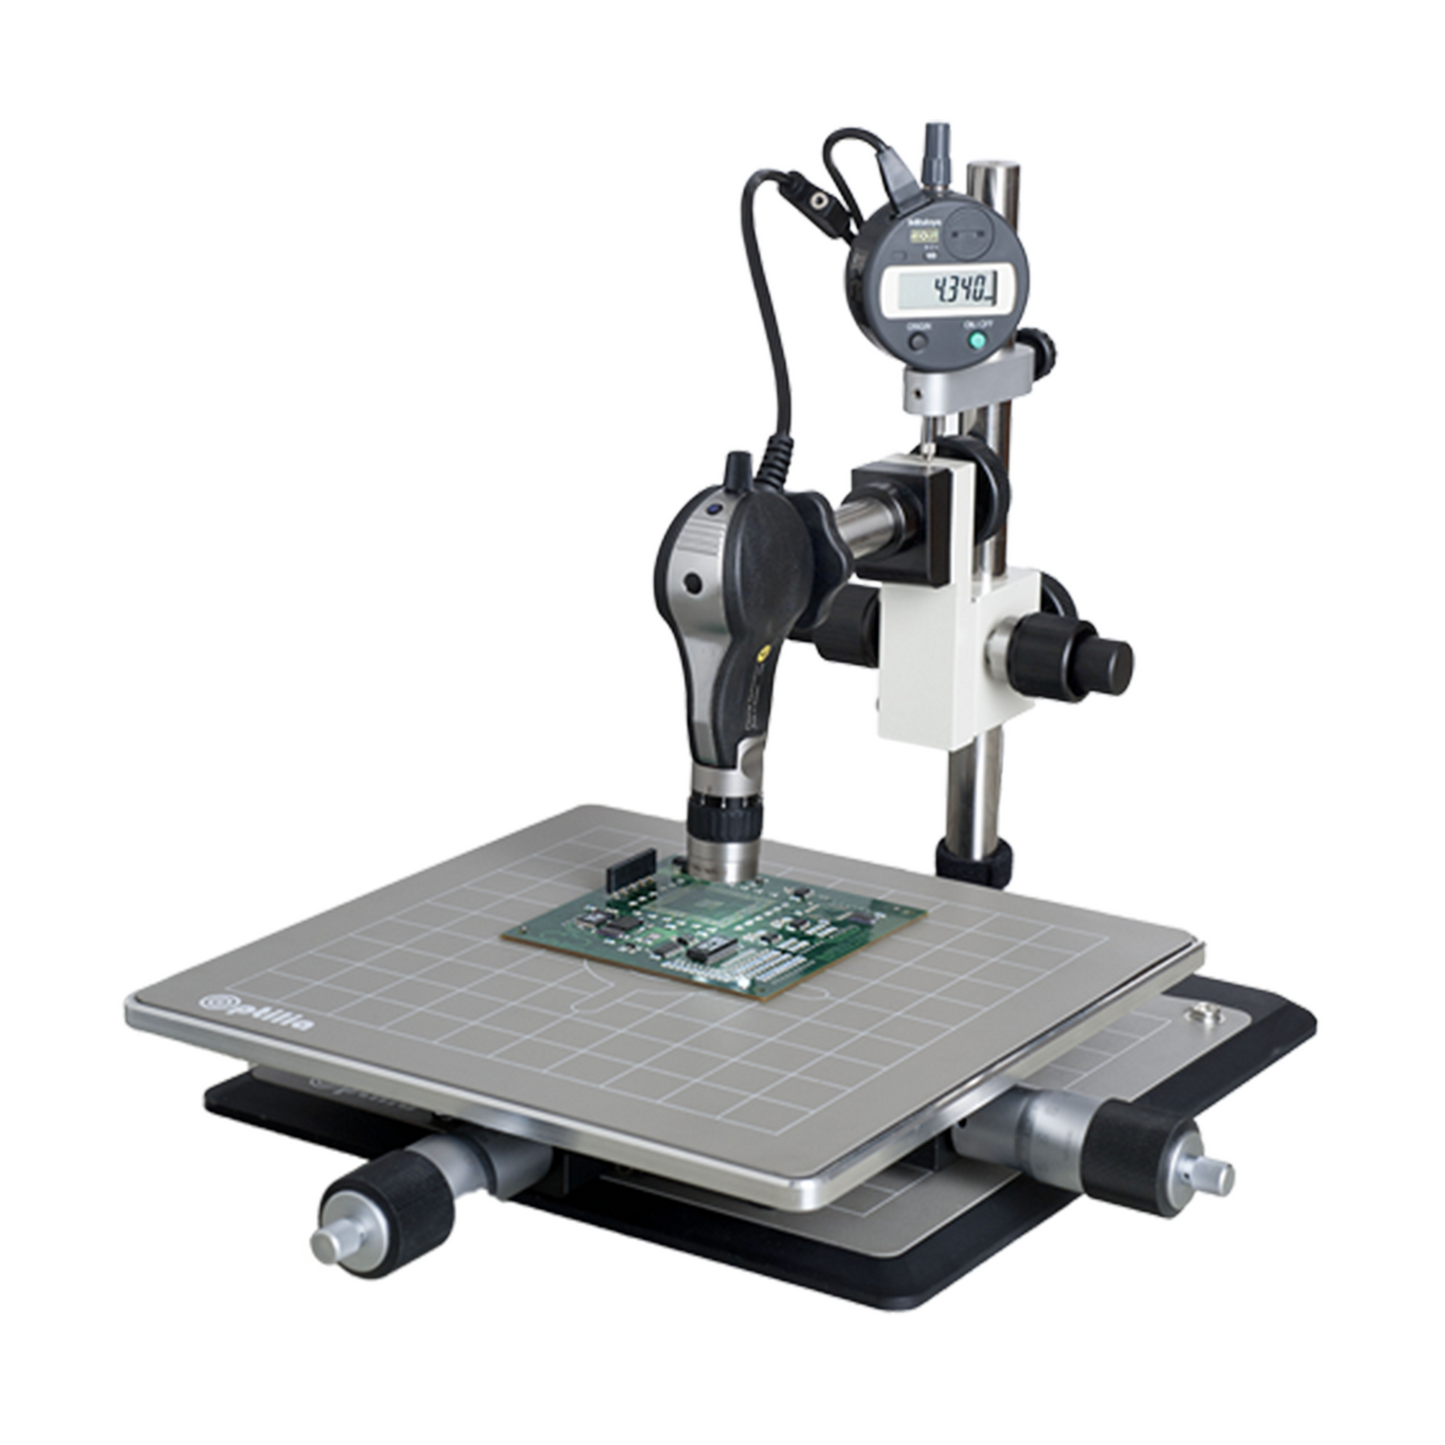 Optilia 3-axis XYZ-Measuring Inspection System - technically competitive 3-axis non-contact dimensional measurement of geometry in electronics production and quality control